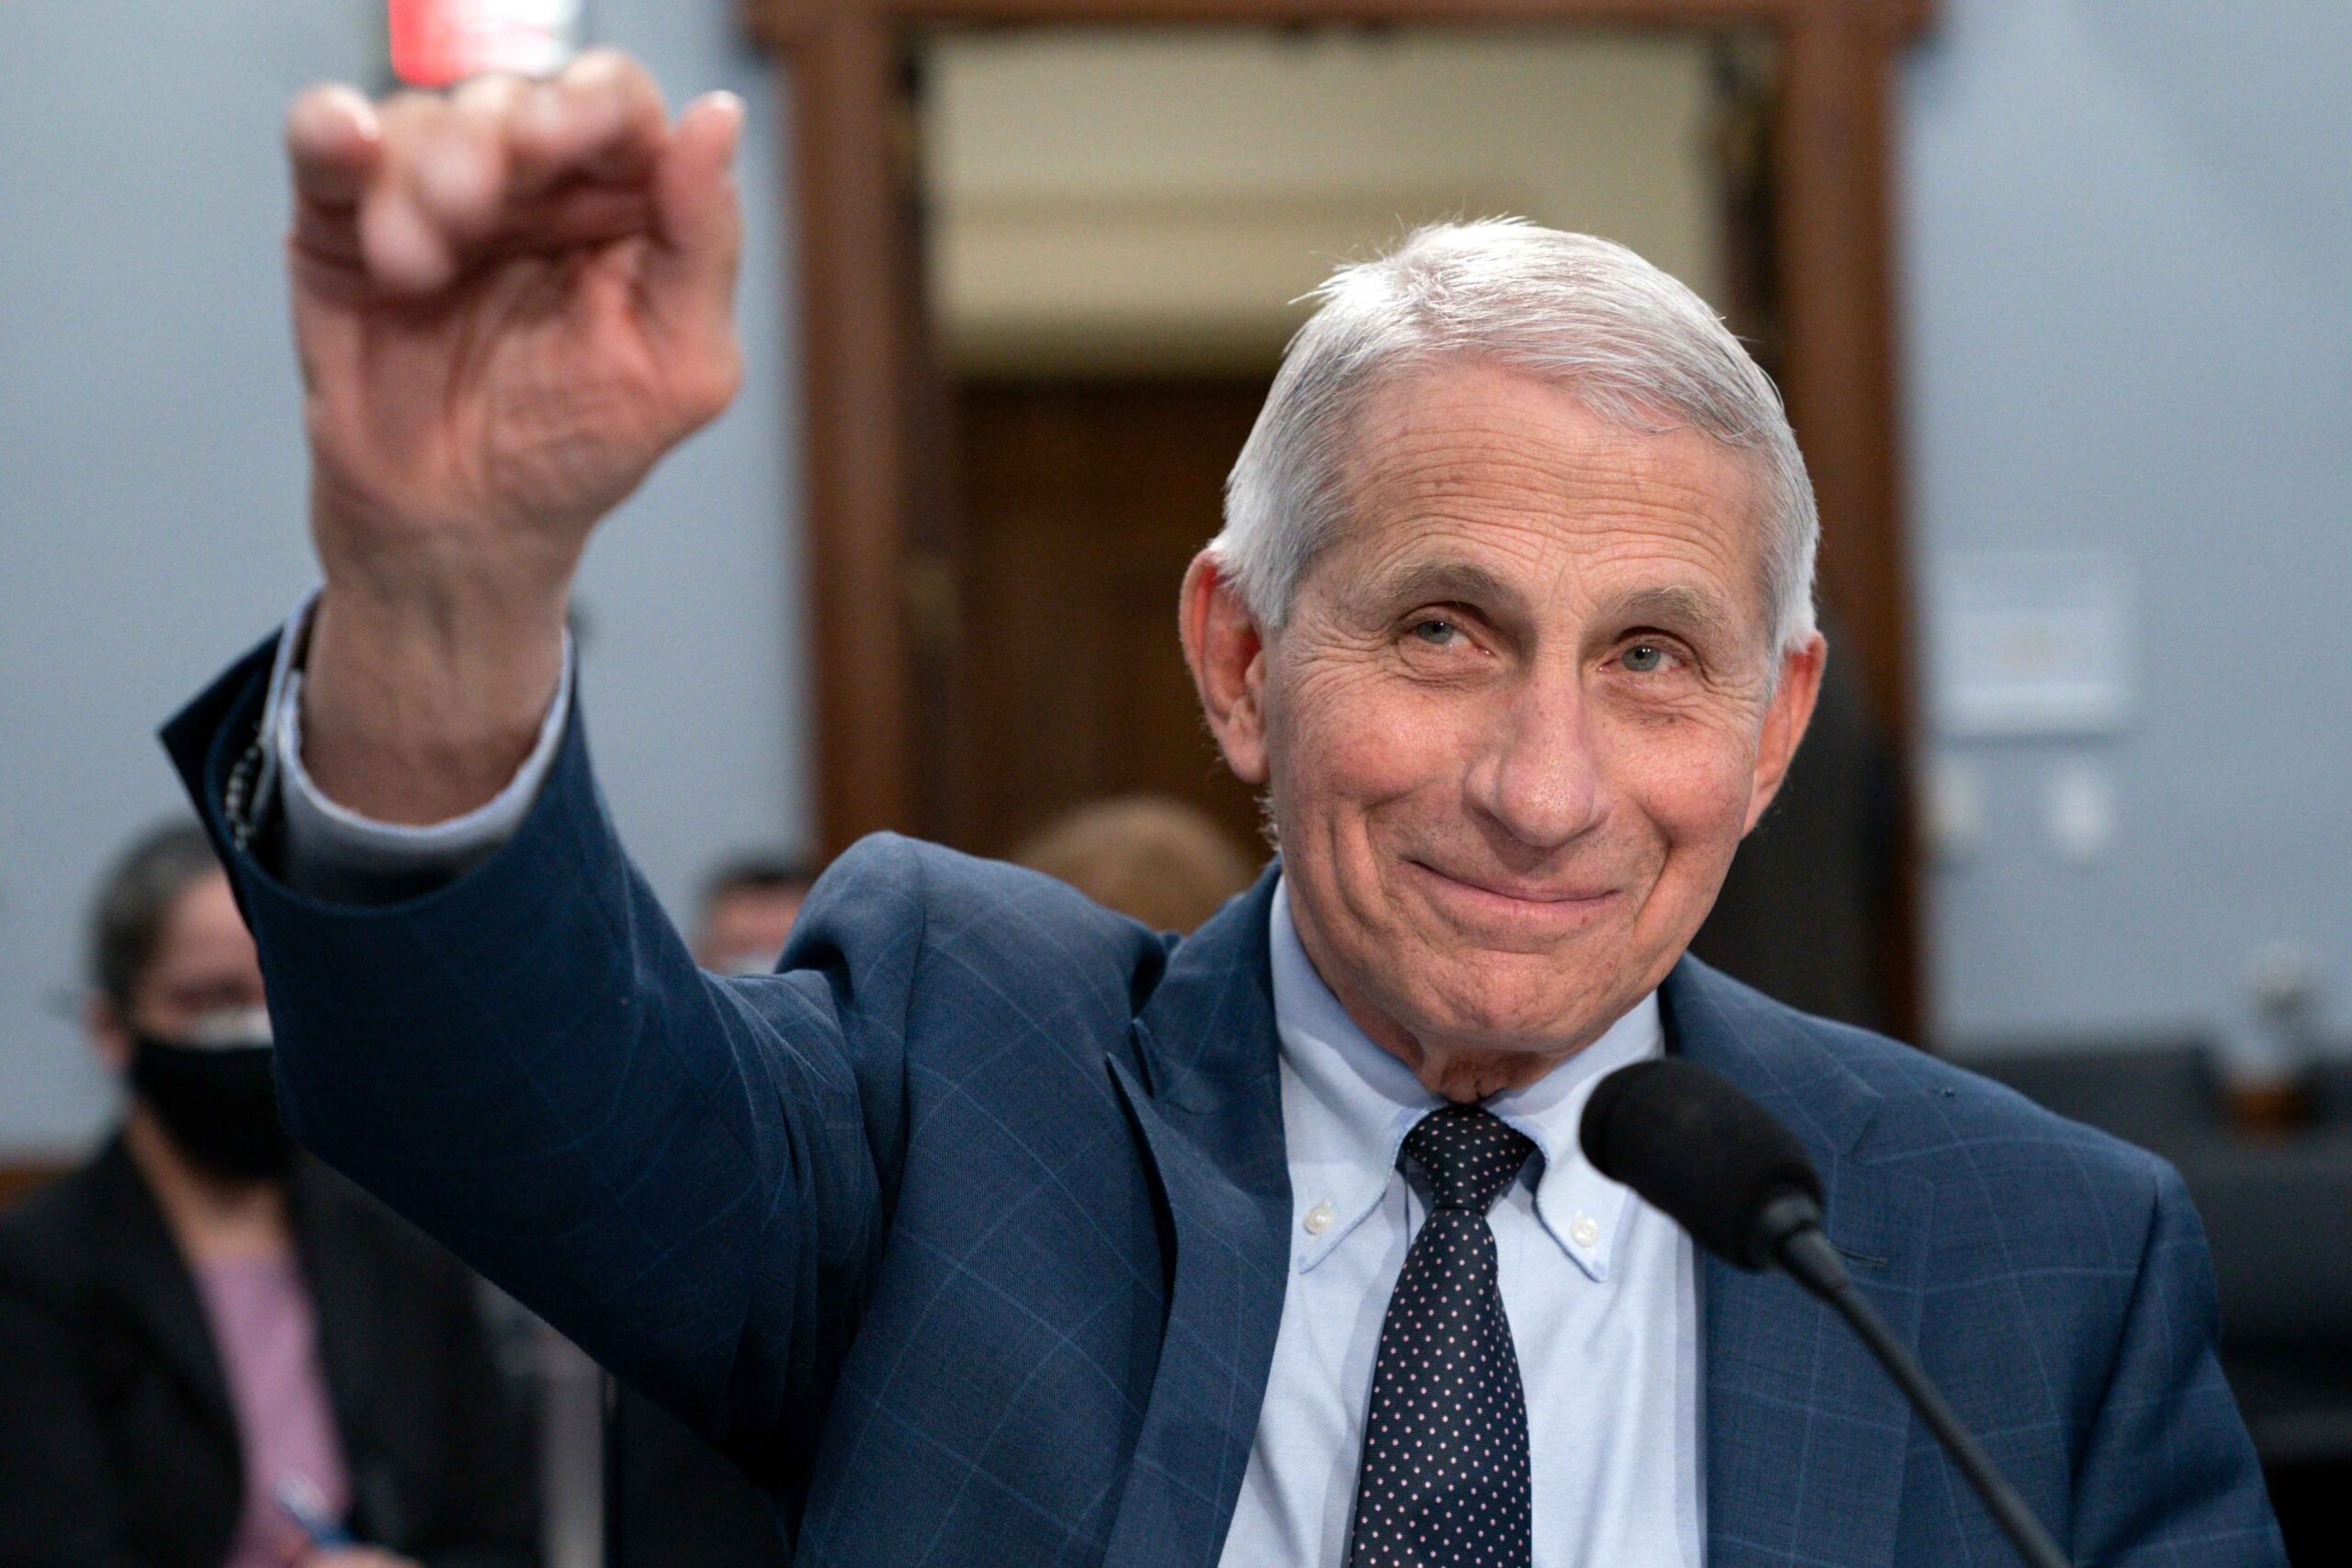 Former NIH director Anthony Fauci and his wife have received a combined net worth of more than $11 million after departing his government post.